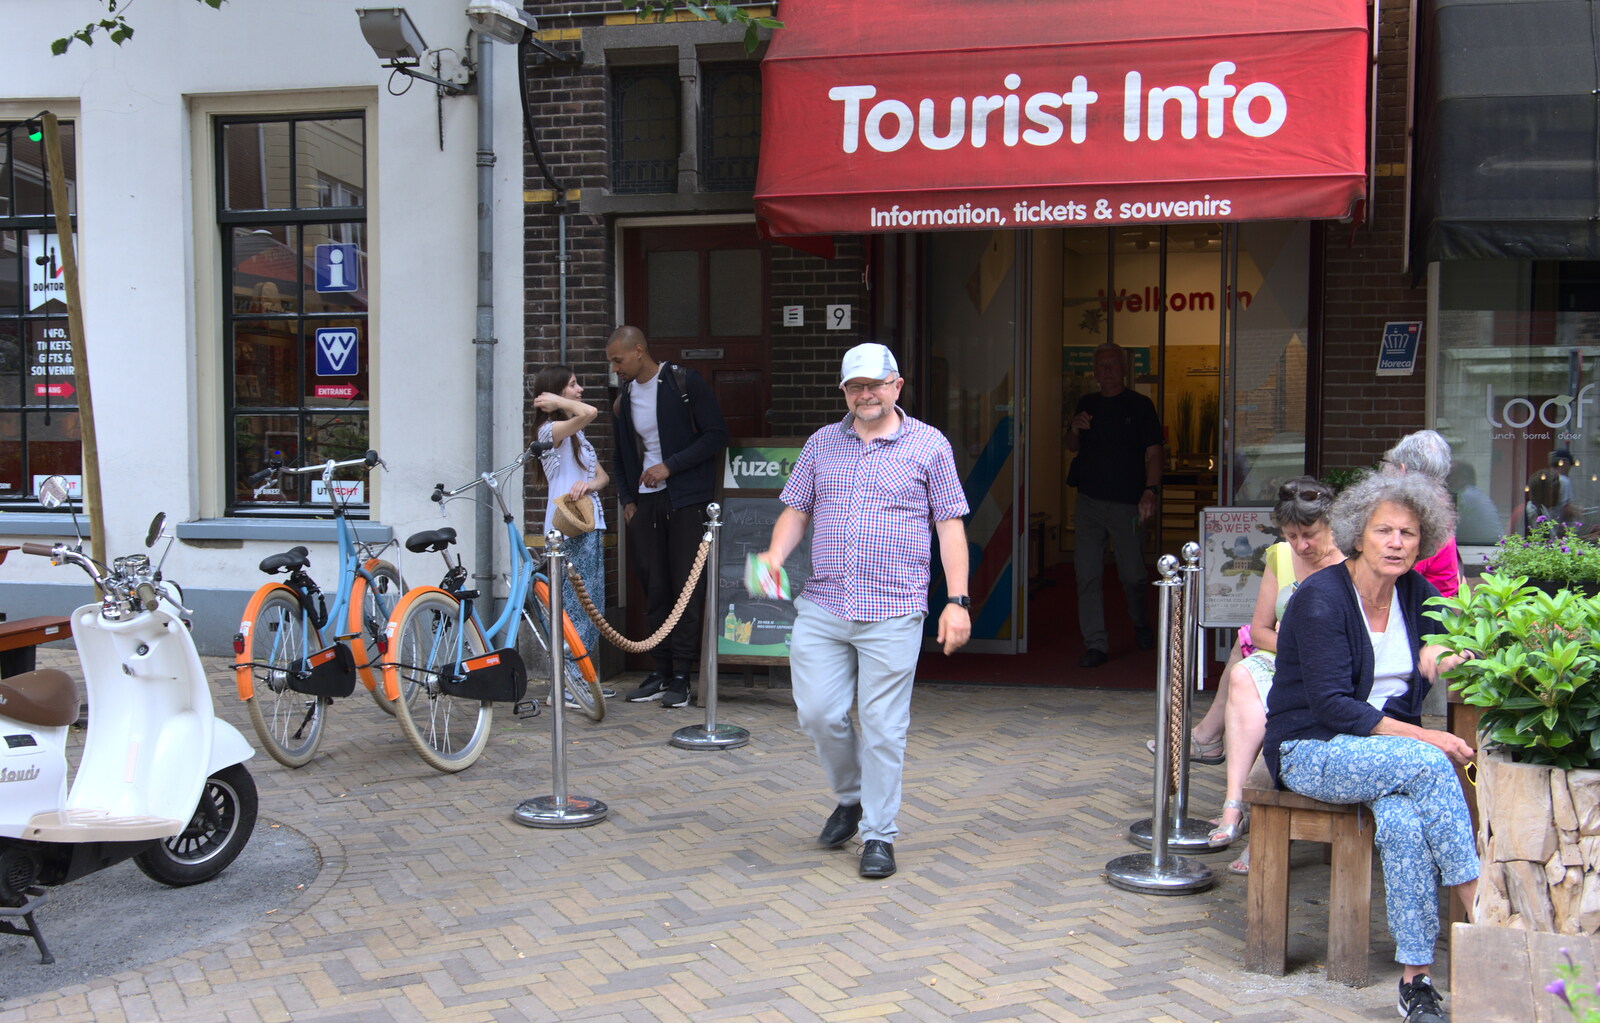 Hamish comes out of the tourist info centre from A Postcard from Utrecht, Nederlands - 10th June 2018